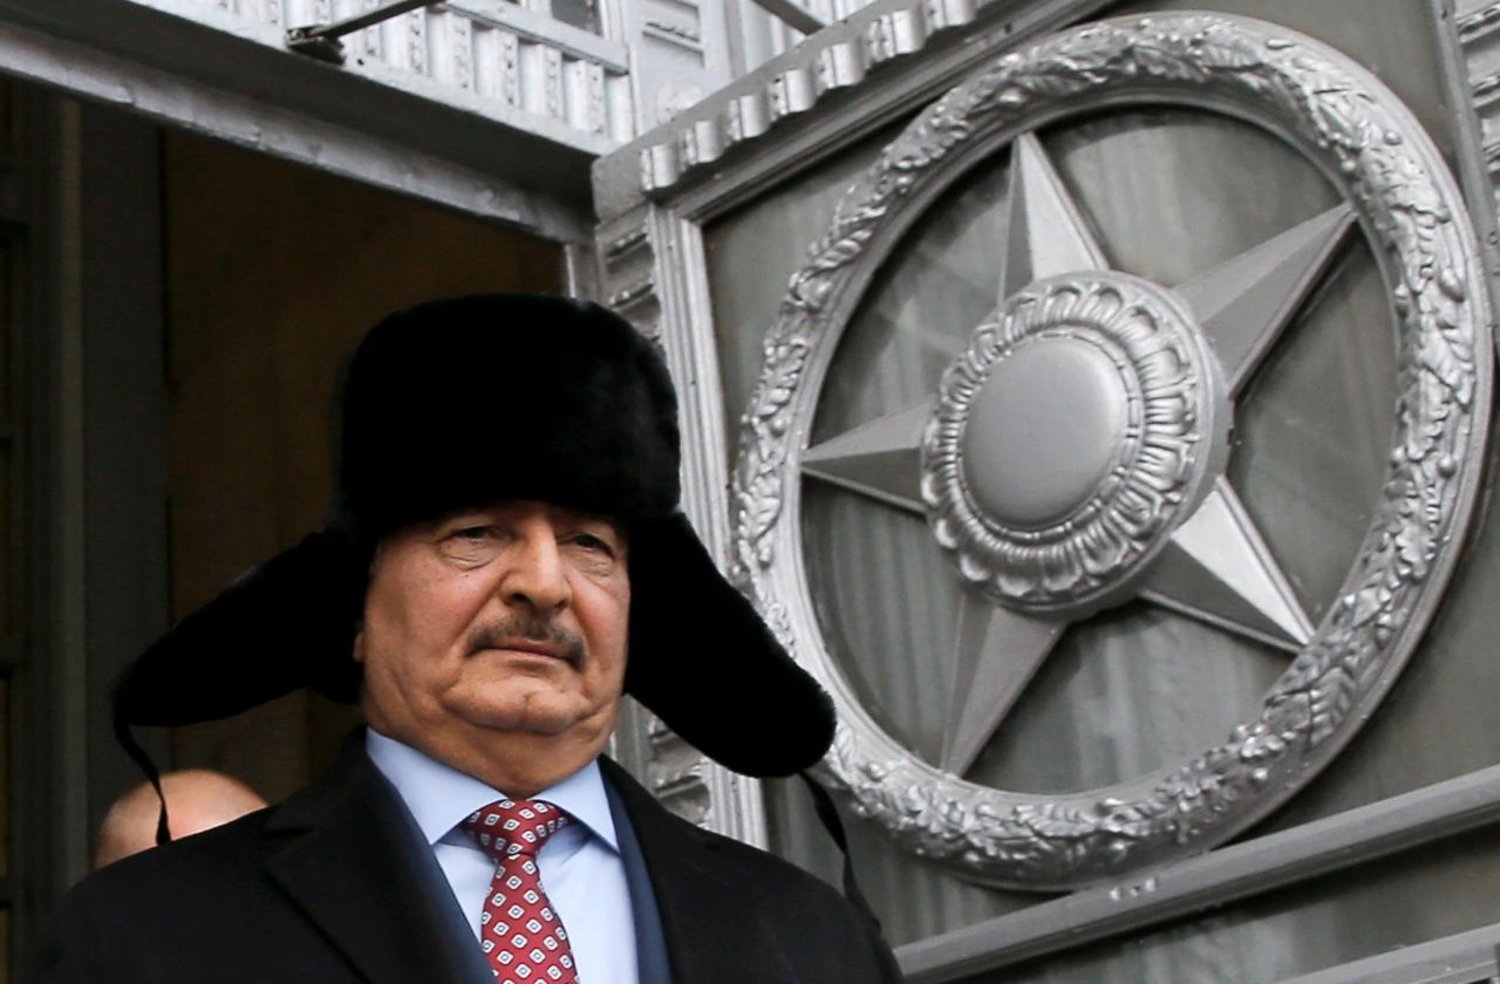 General Khalifa Haftar, commander in the Libyan National Army (LNA), leaves after a meeting with Russian Foreign Minister Sergei Lavrov in Moscow, Russia, November 29, 2016. REUTERS/Maxim Shemetov/File Photo